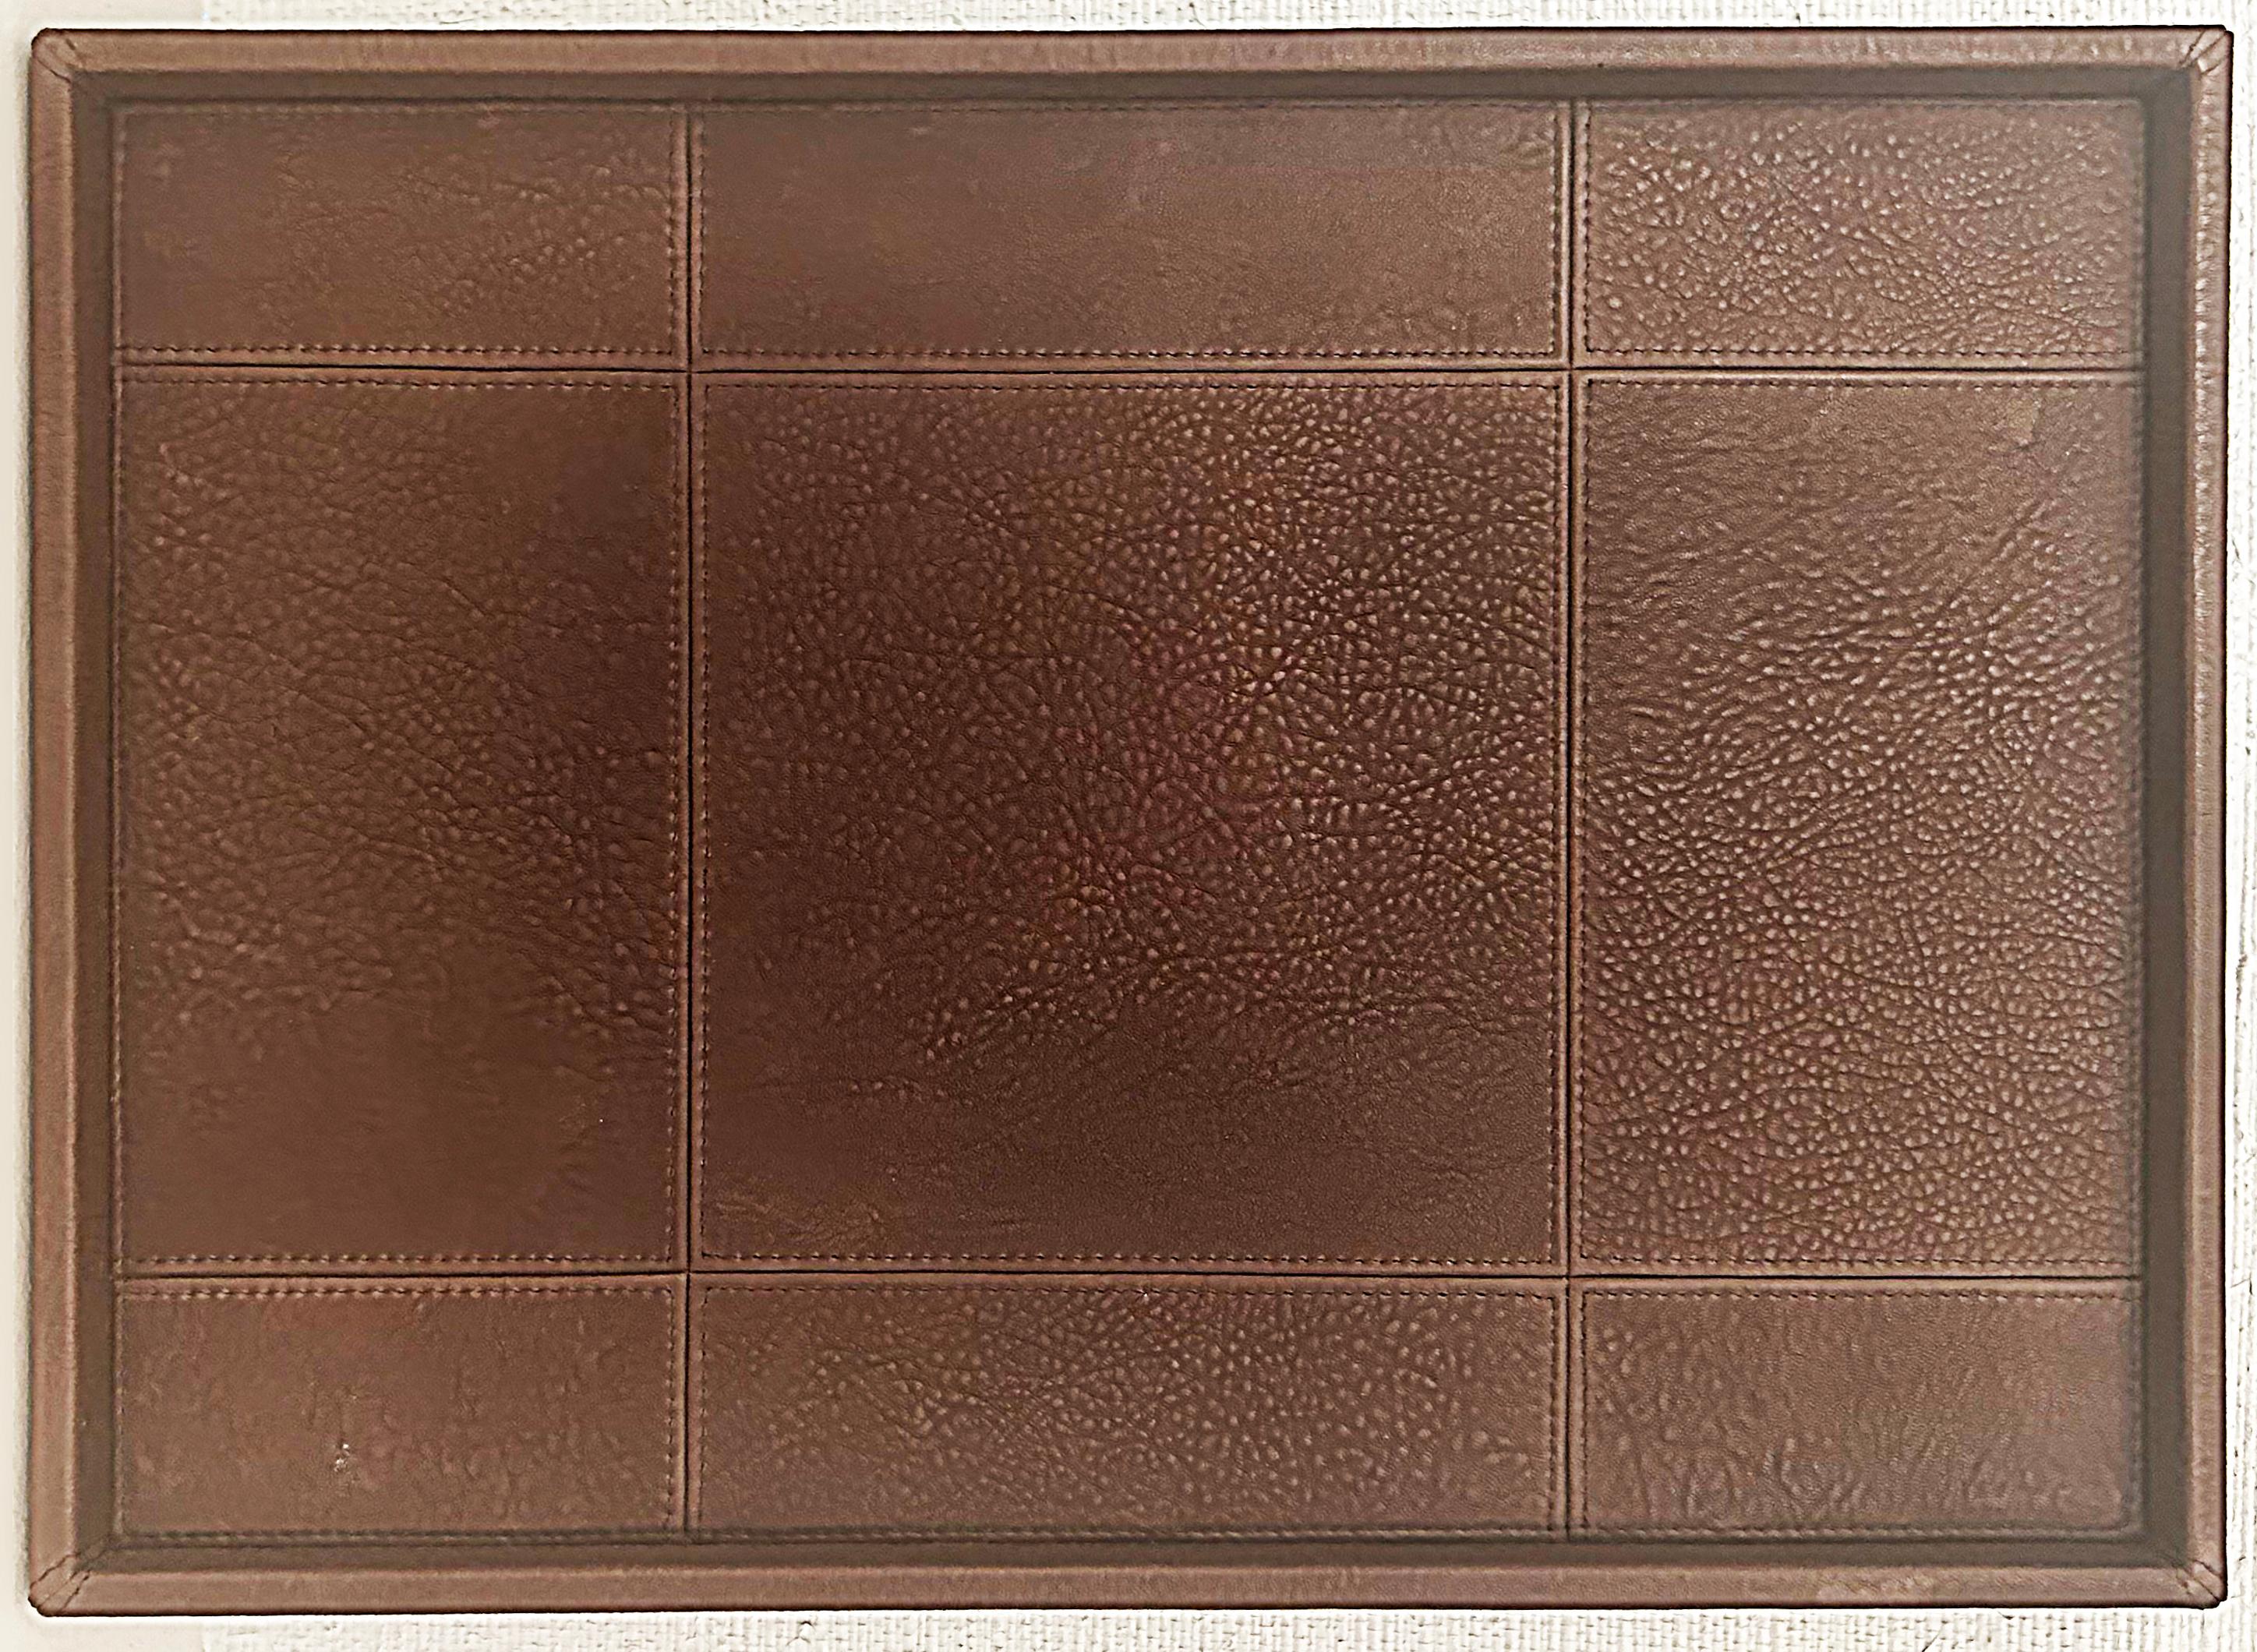 Contemporary Gilles Caffier Leather Clad Vanity Tray Made in France 2006 For Sale